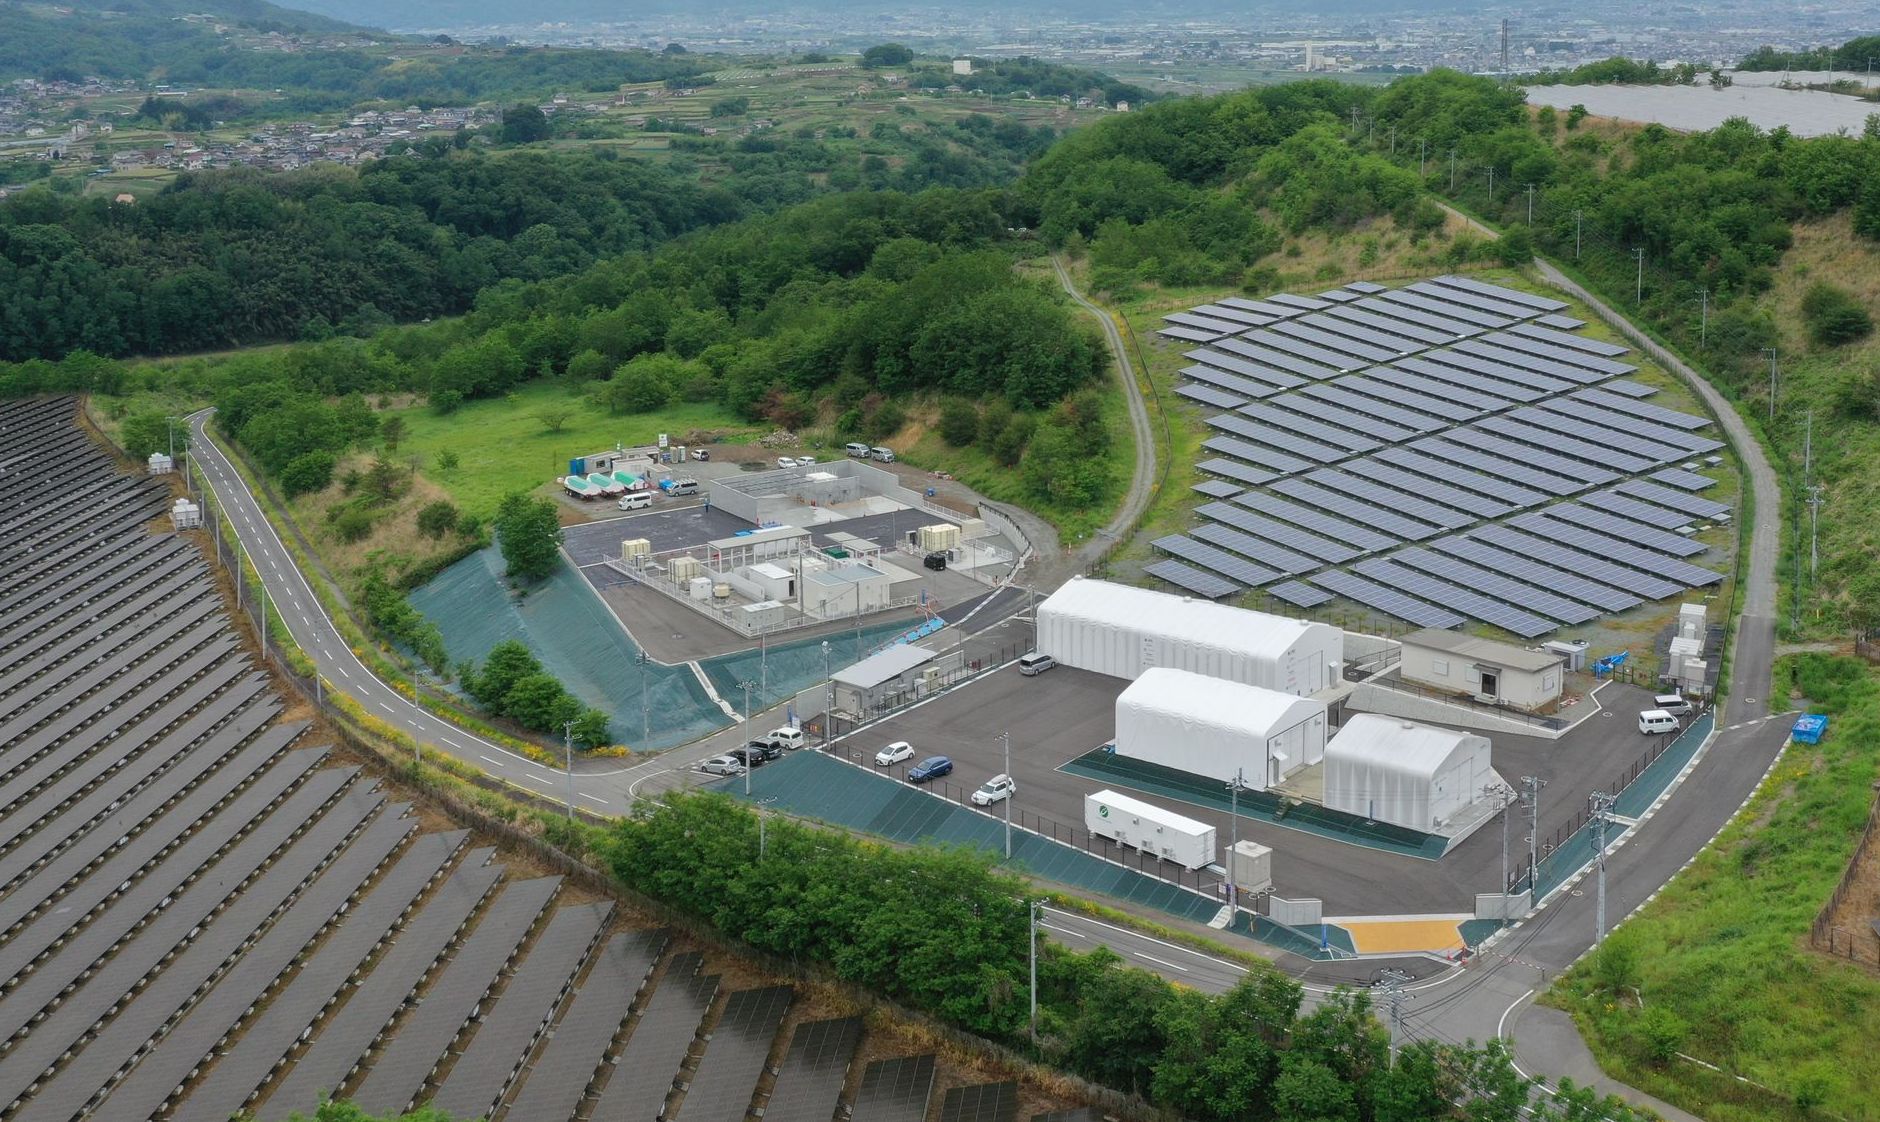 A Yamanashi Prefecture Hydrogen plant in Japan